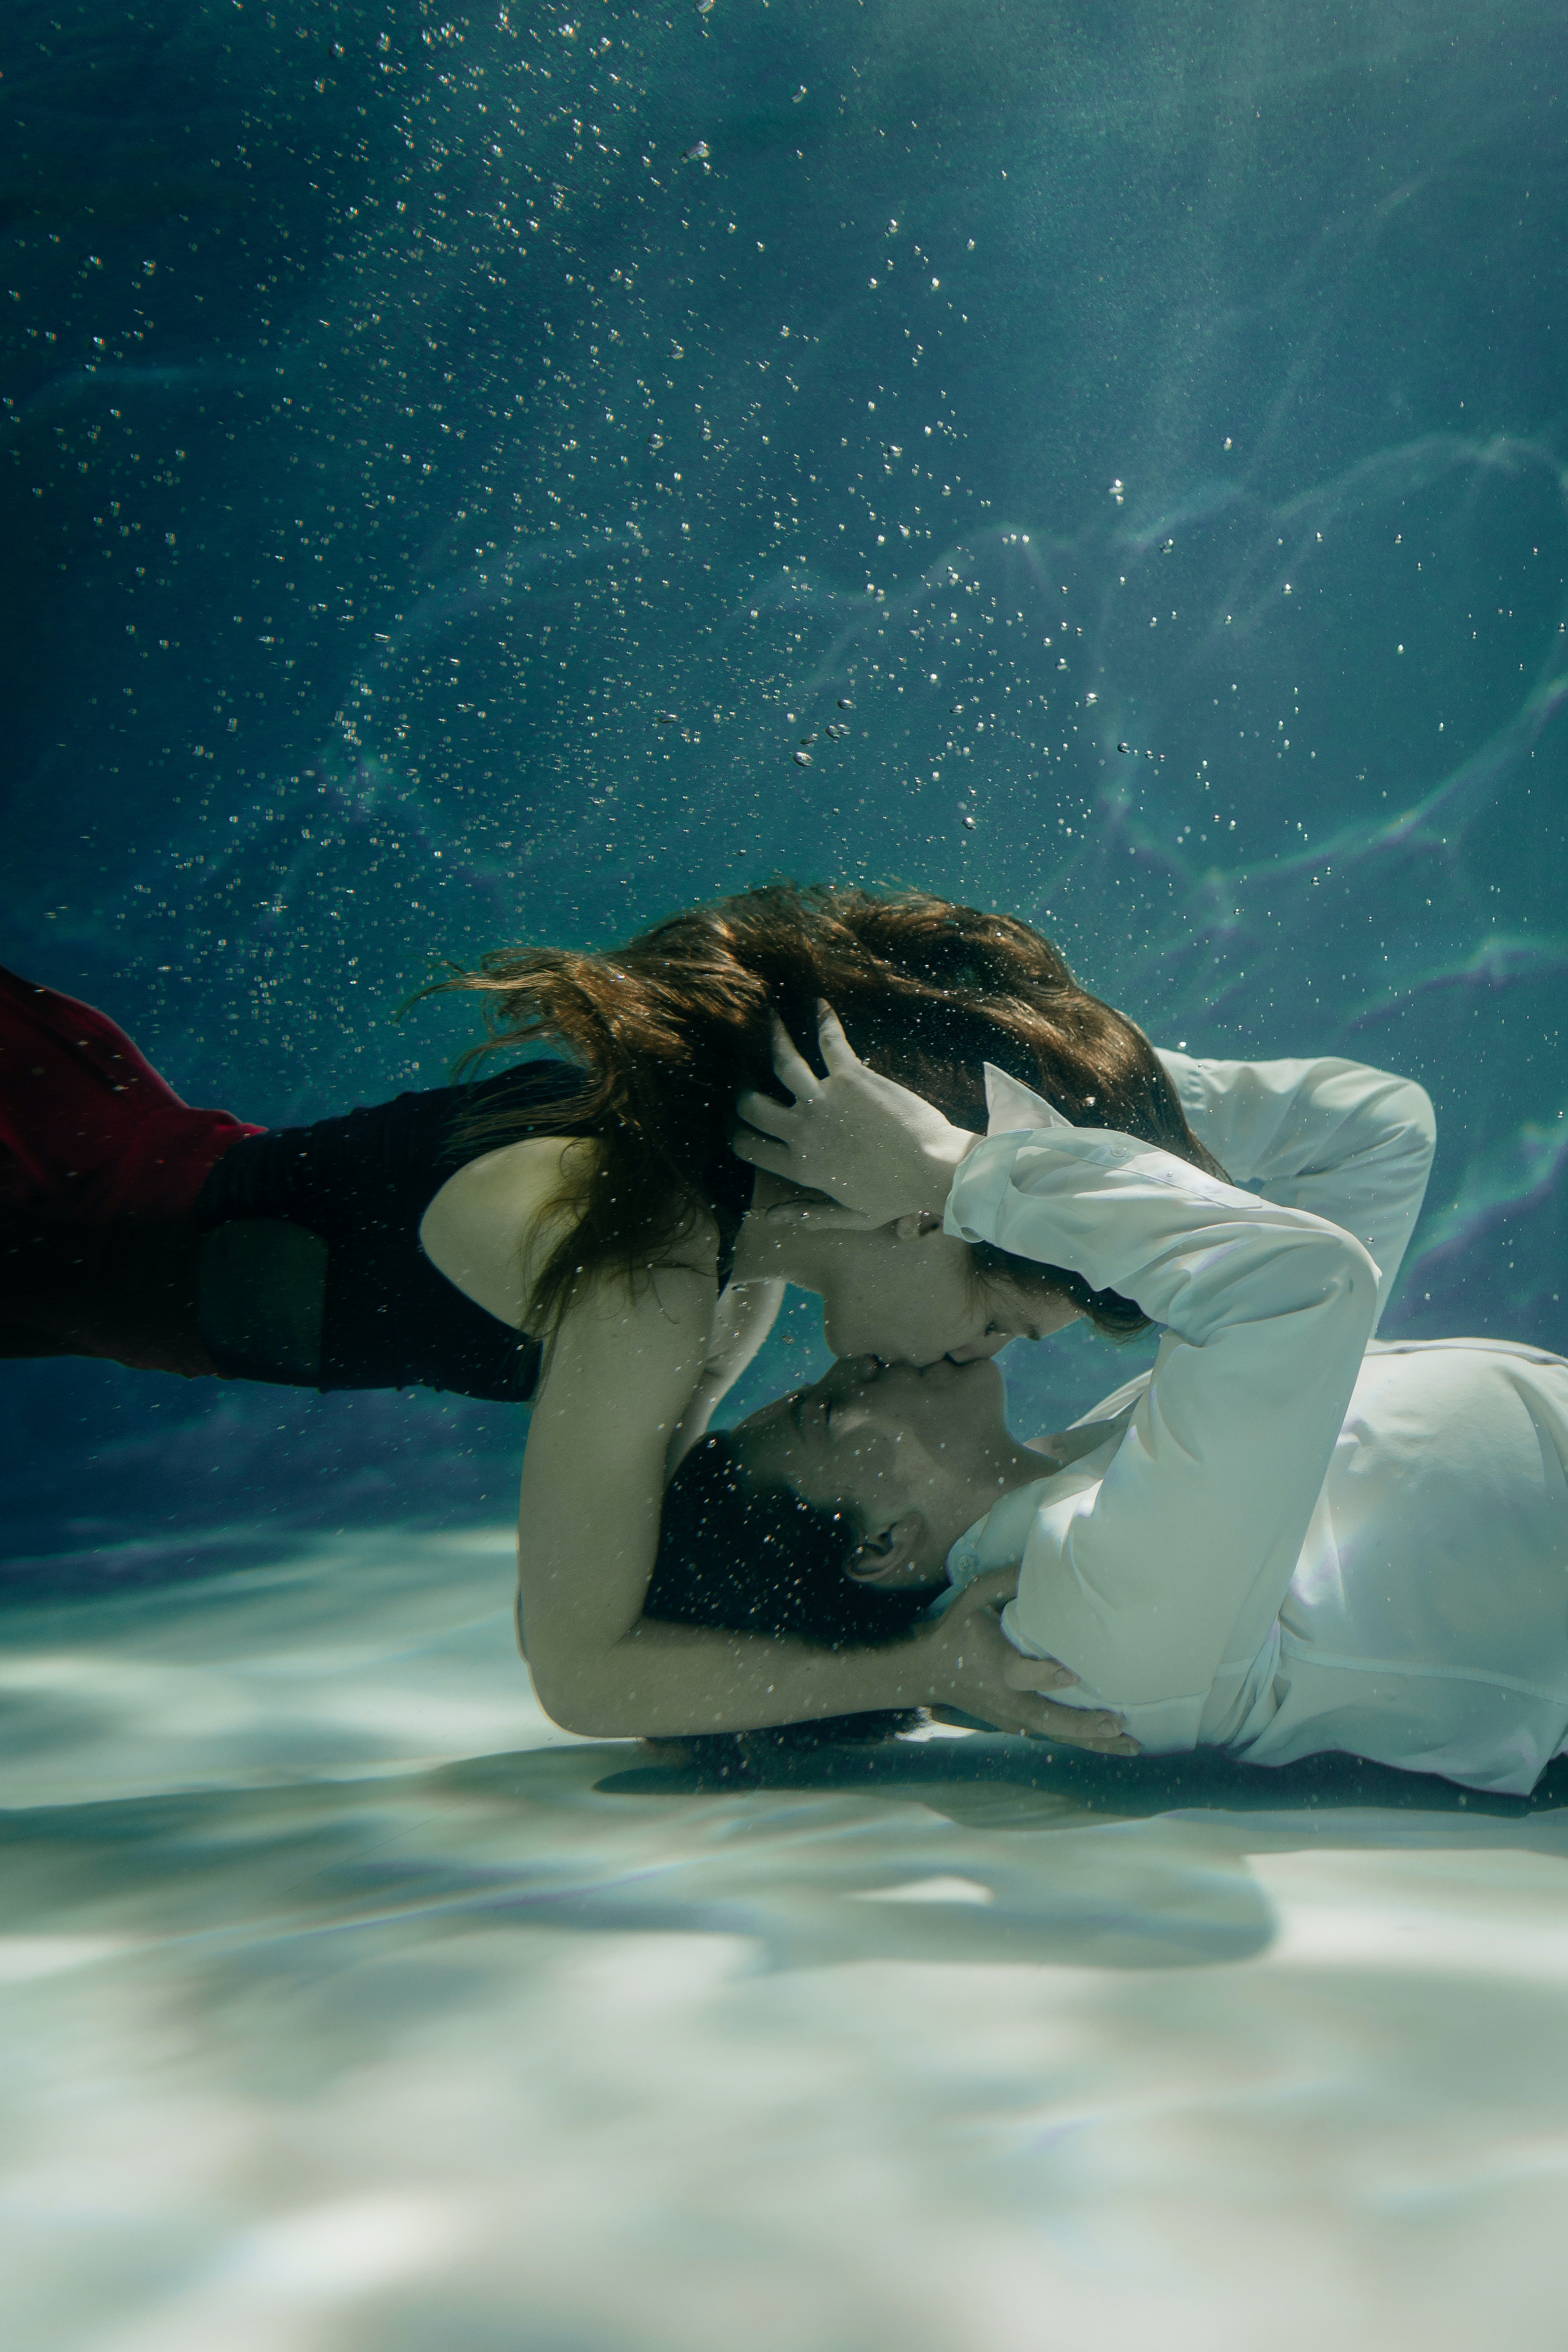 A couple kissing underwater. | Source: Pexels